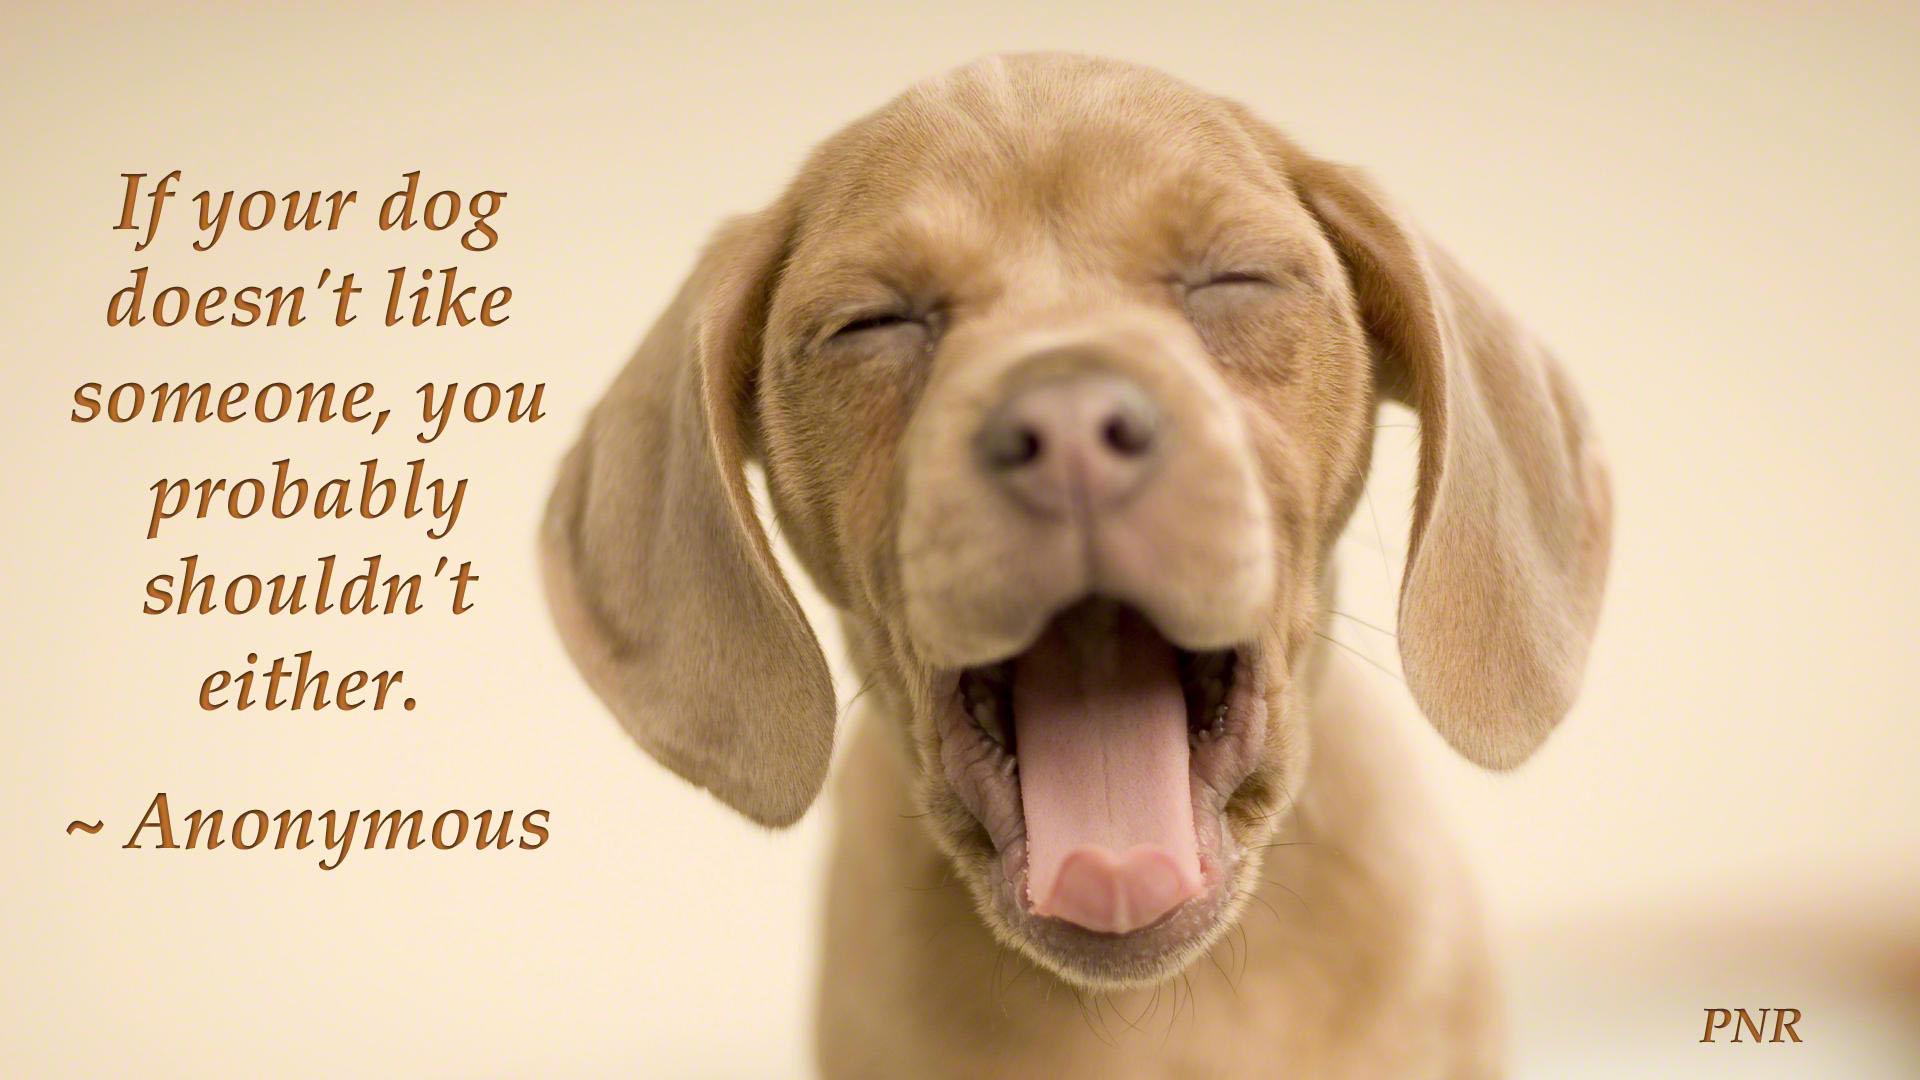 A Plethora of Dog Quotes